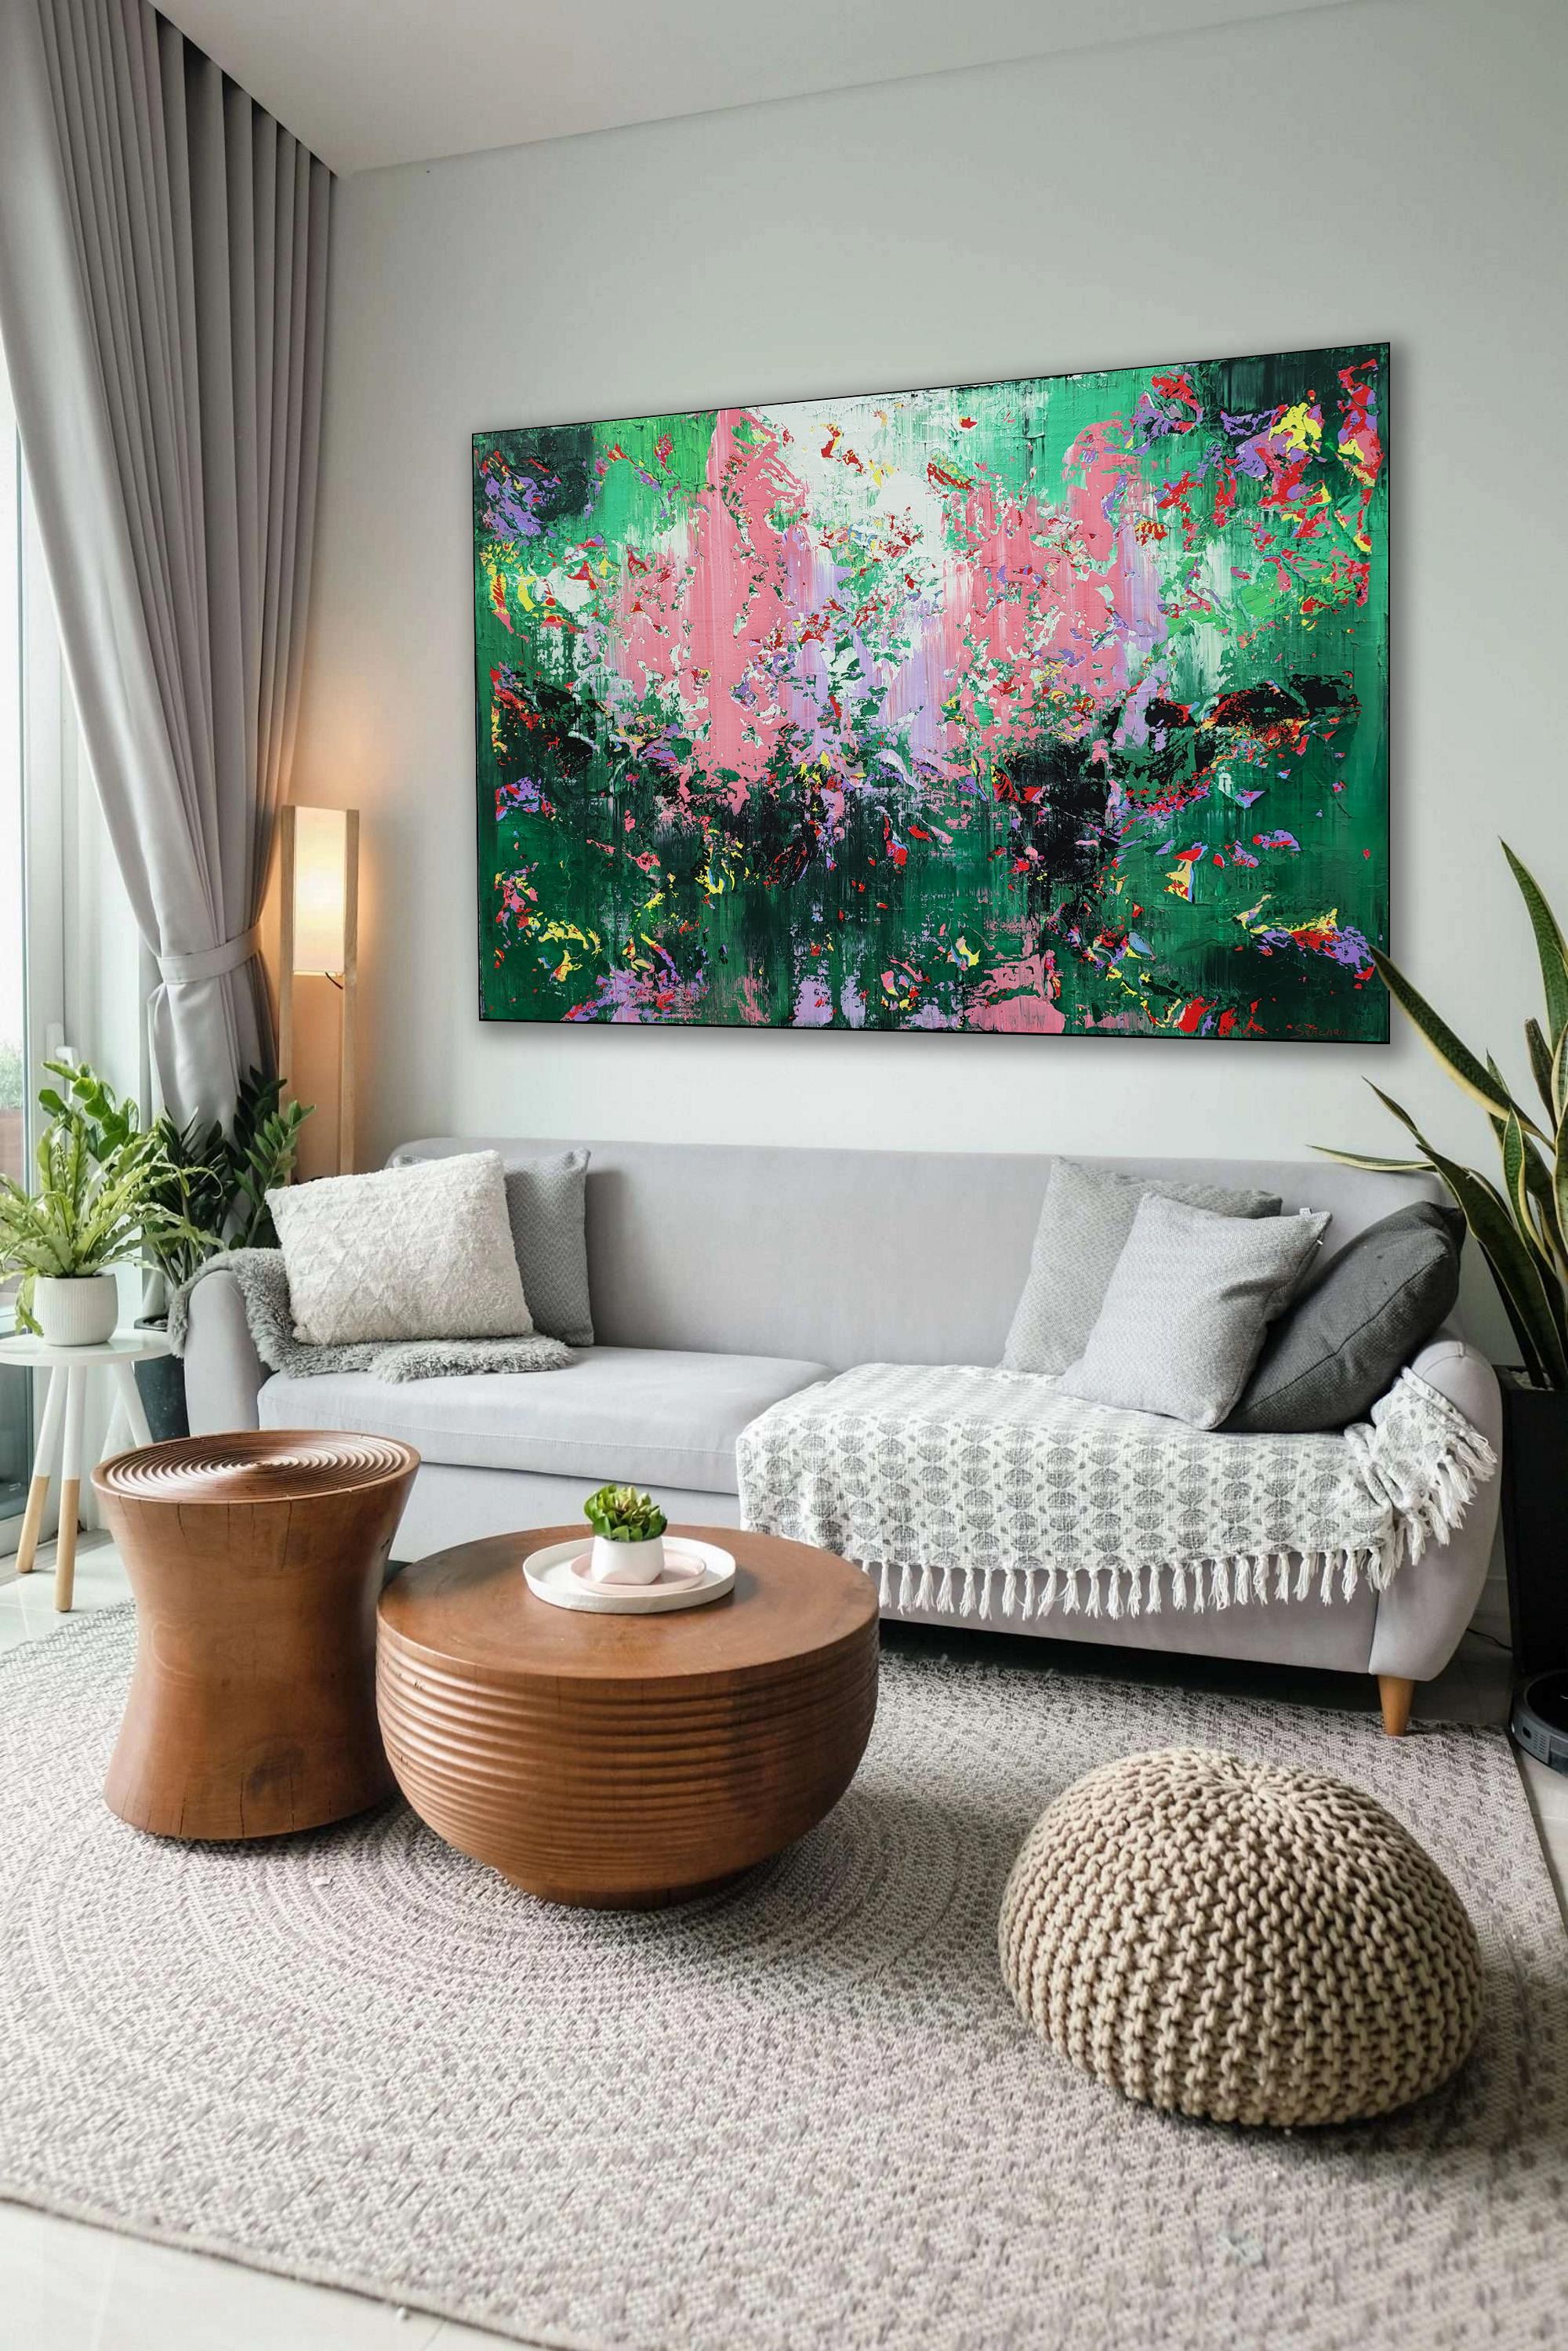 There’s something different about the homes of creative people. They like to surround themselves with inspiring things, from unique tablecloths to the incredible paintings on the walls. Alex Senchenko’s ,, Abstract 2327 '' can give your home that